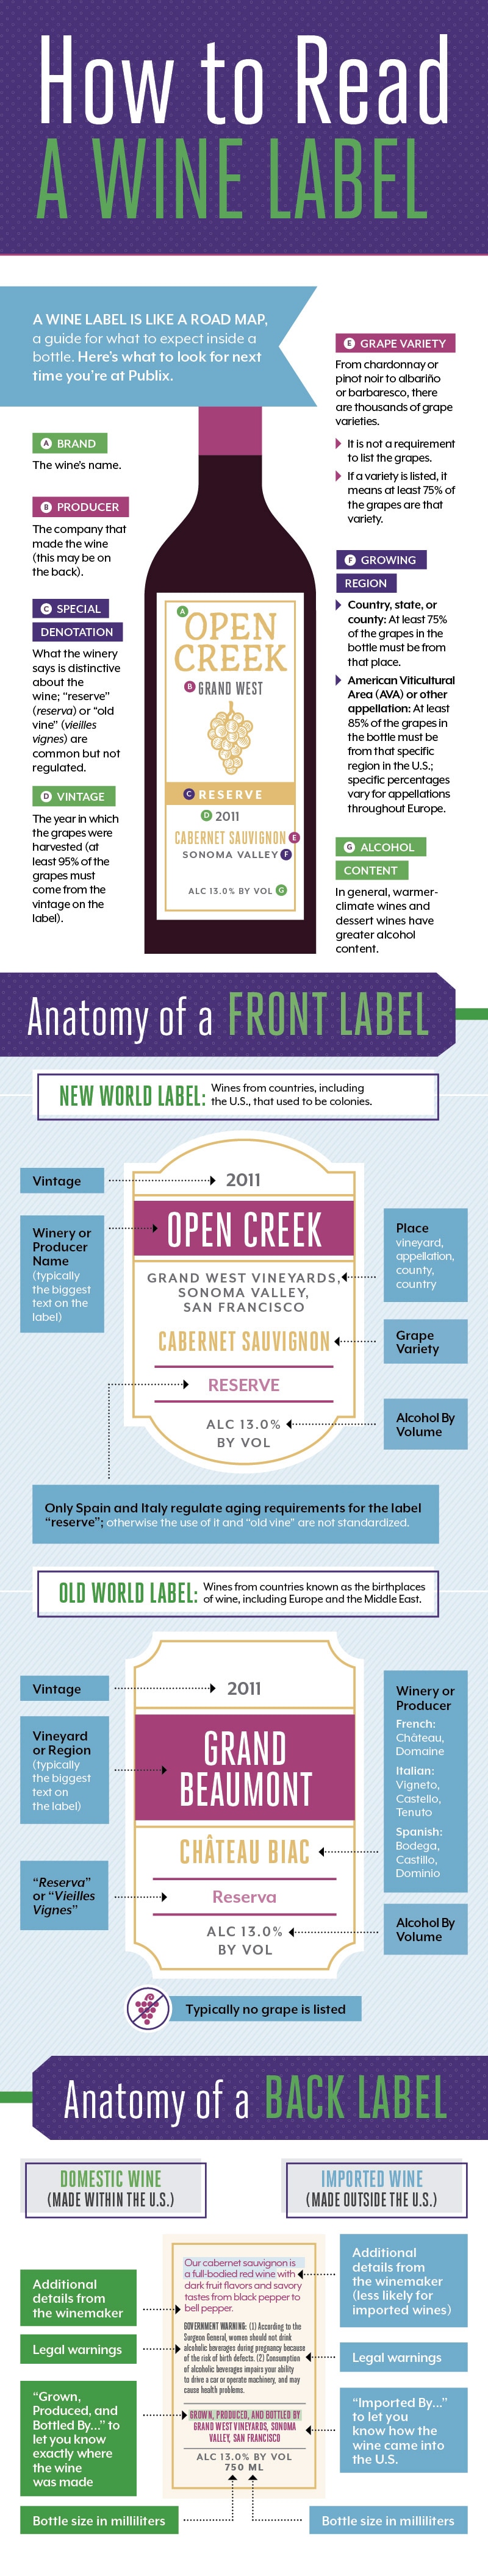 how to read a wine label infographic